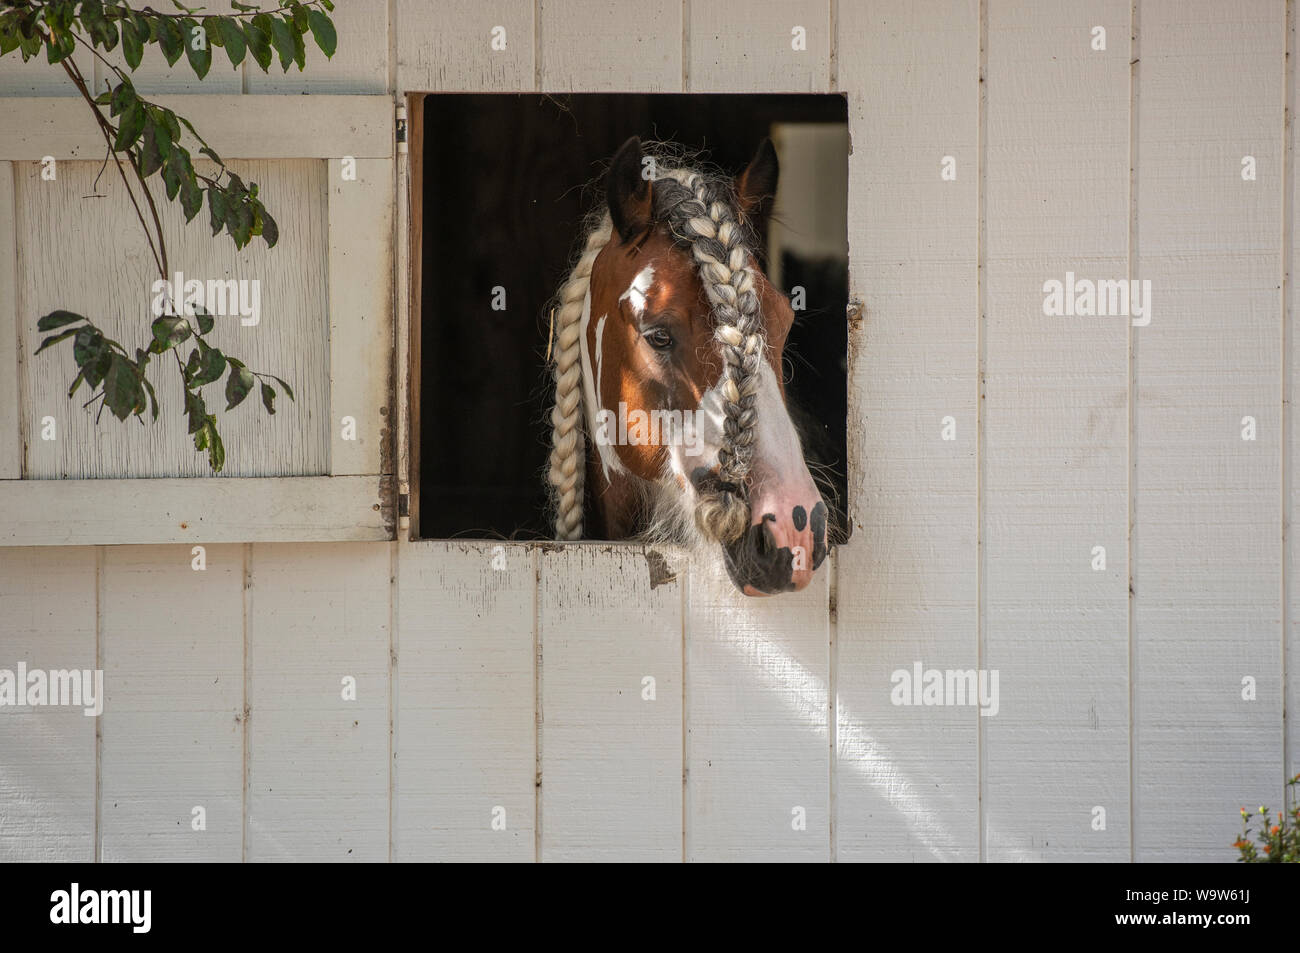 Stallion with braided mane and forelock looking our rustic barn window Stock Photo